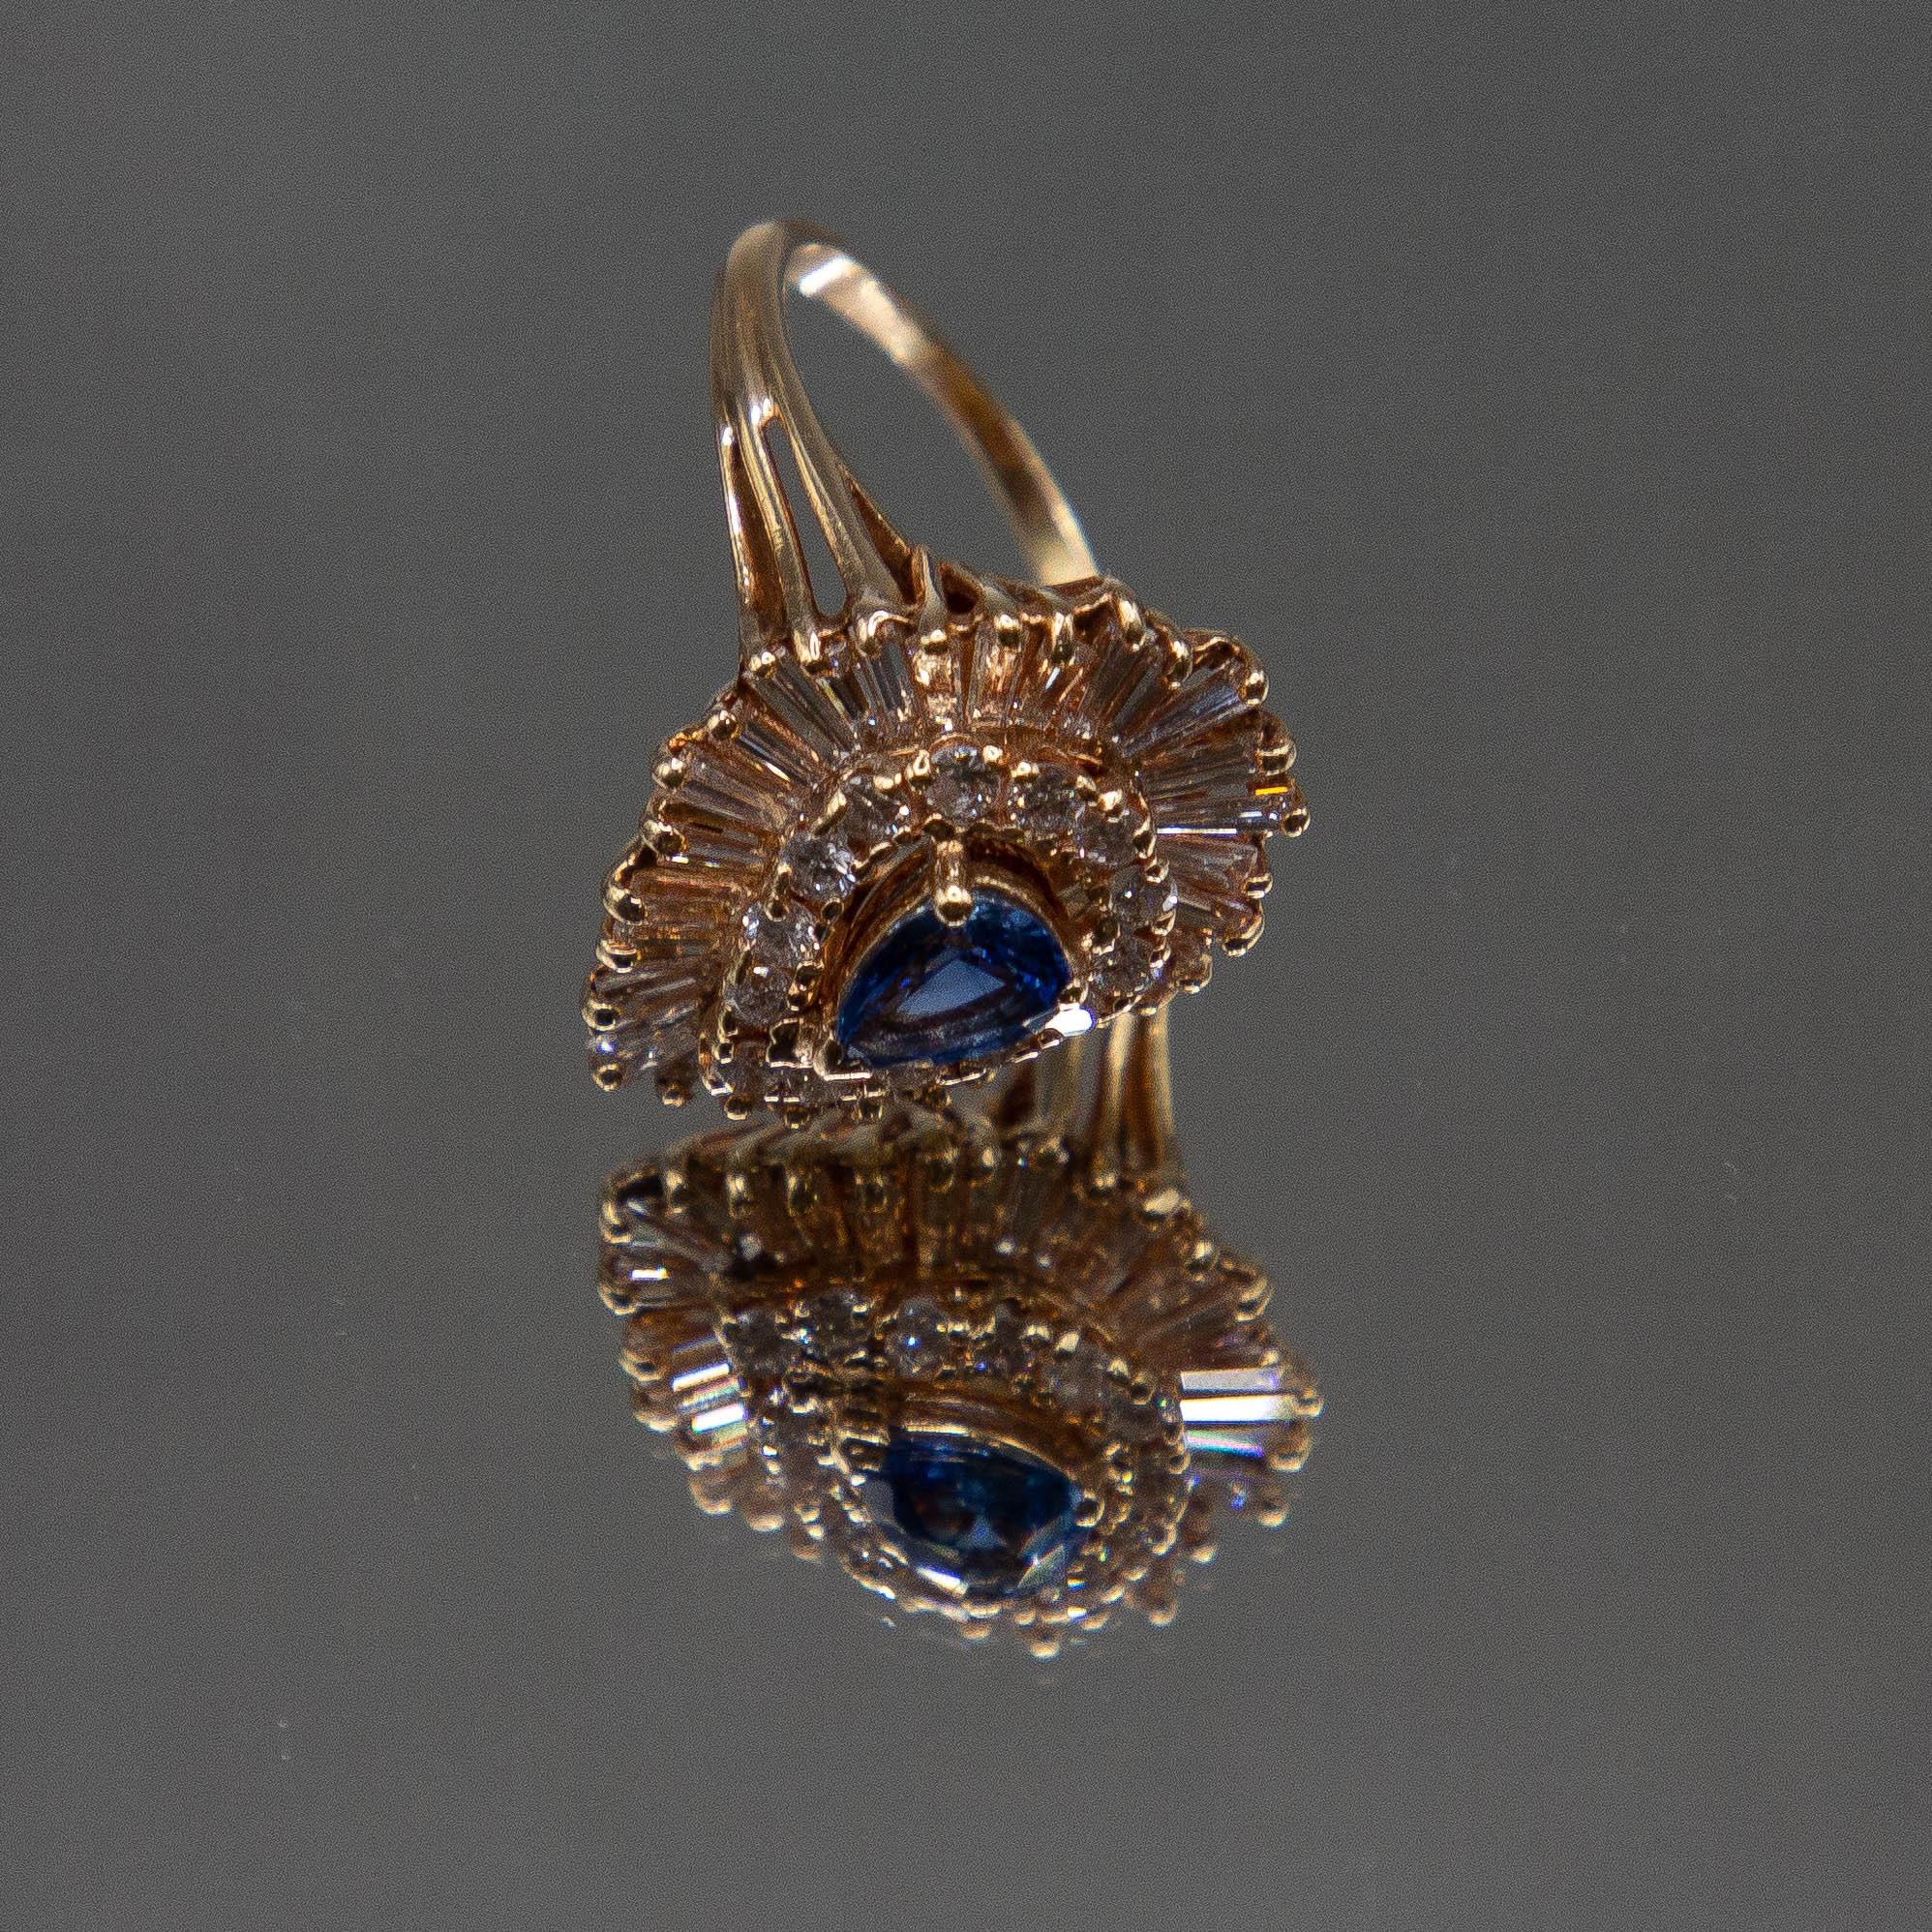 Contemporary 14K Yellow Gold Blue Pear Shaped Ceylon Sapphire/Diamond Ring 2.35 Carats Total For Sale